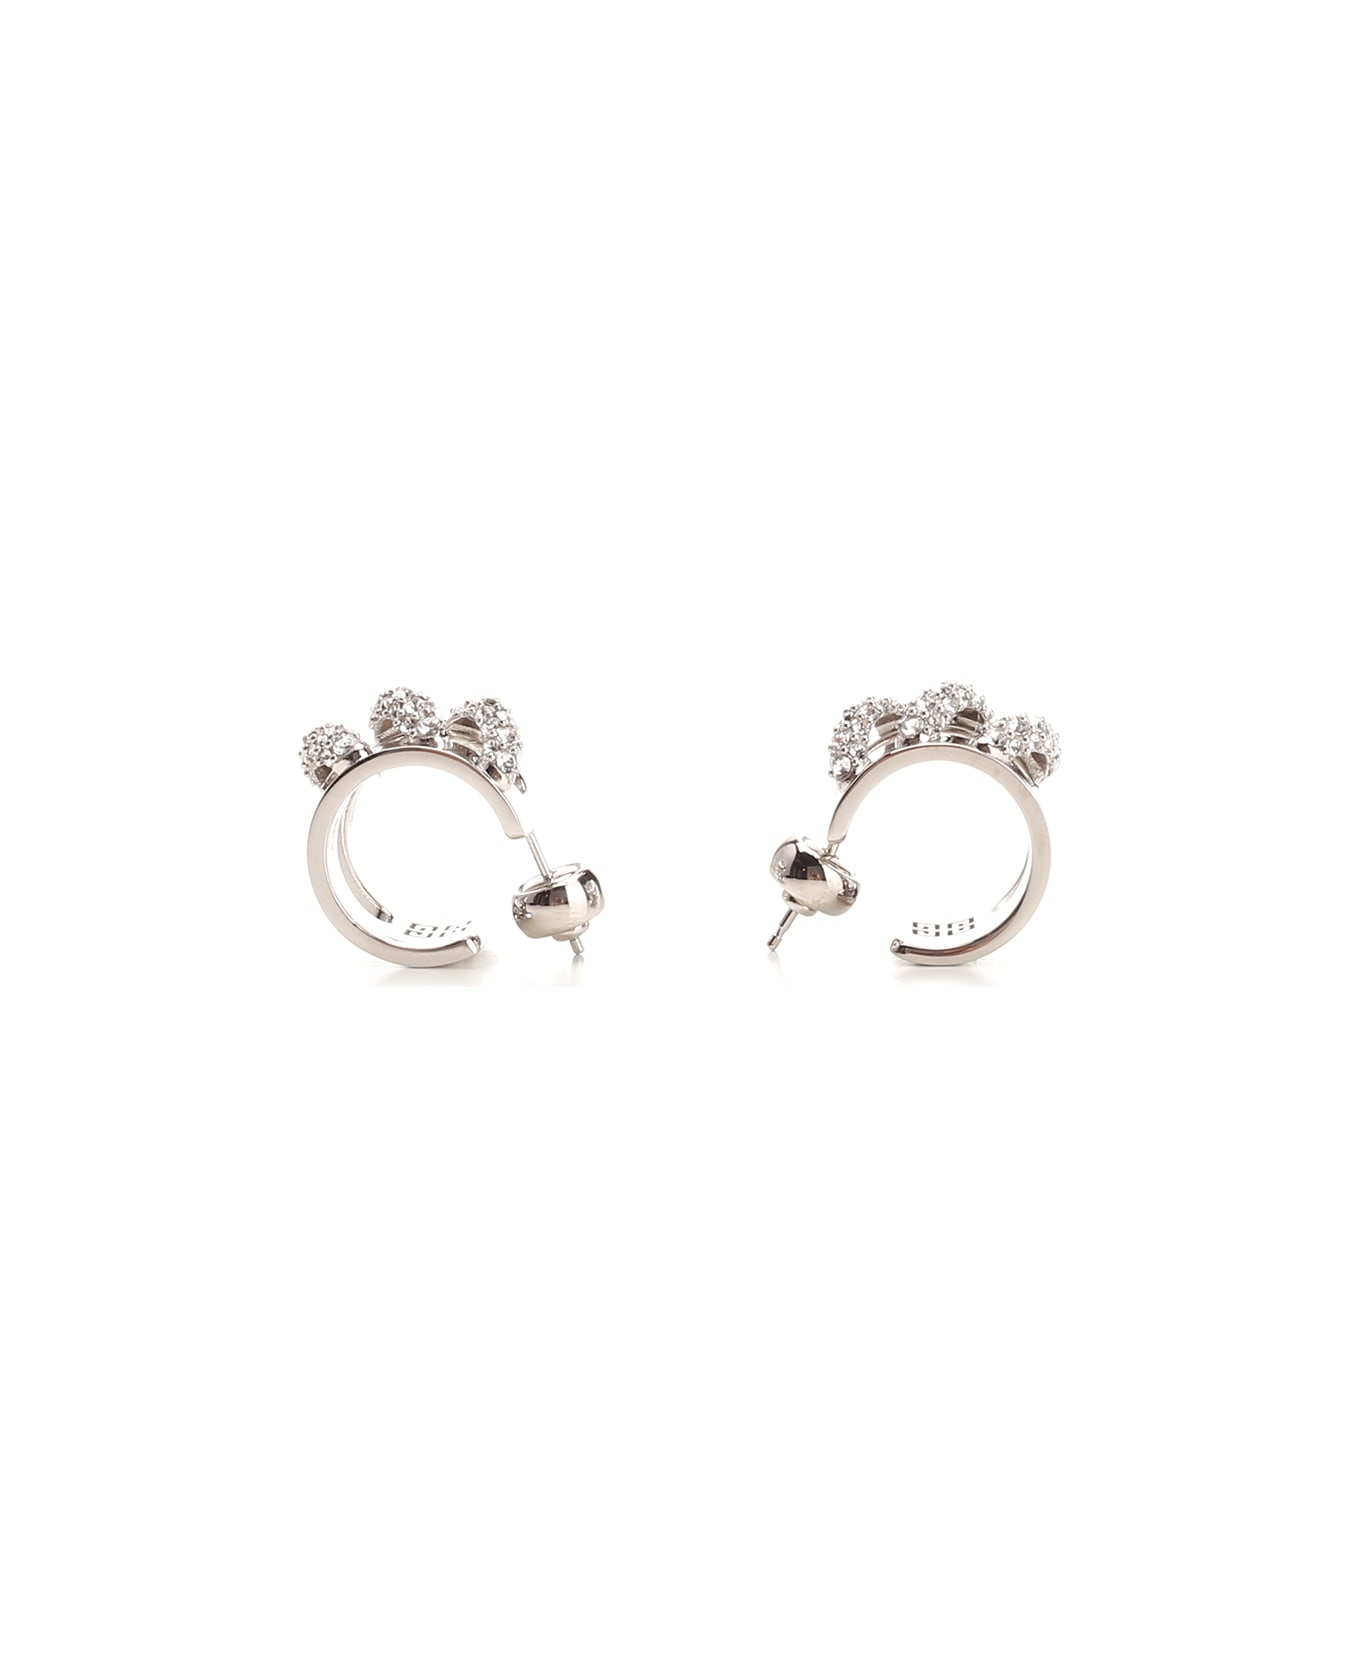 Givenchy 'stitch' Earrings - SILVERY